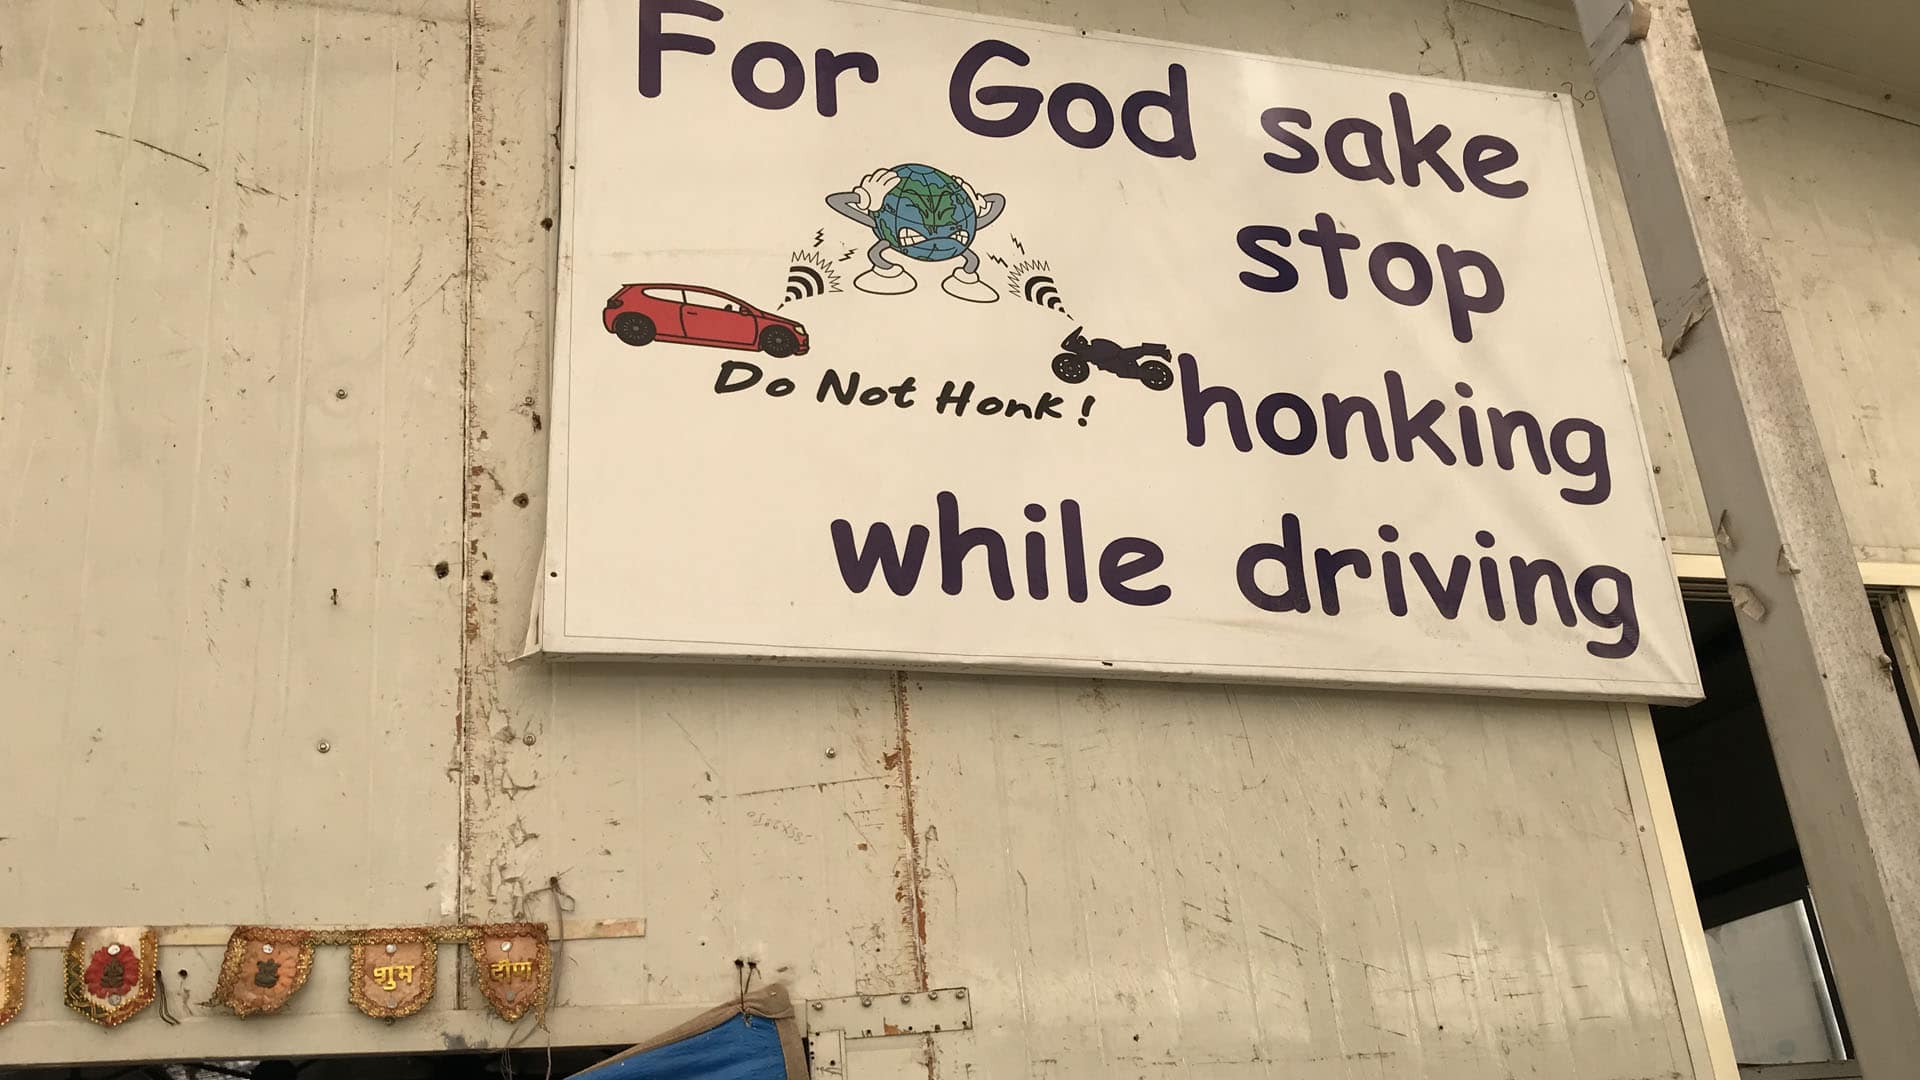 An anti-honking sign hangs on the wall at the Earth Saviours Foundation just outside New Delhi. The foundation is active in caring for the homeless and several environmental causes, including noise pollution.